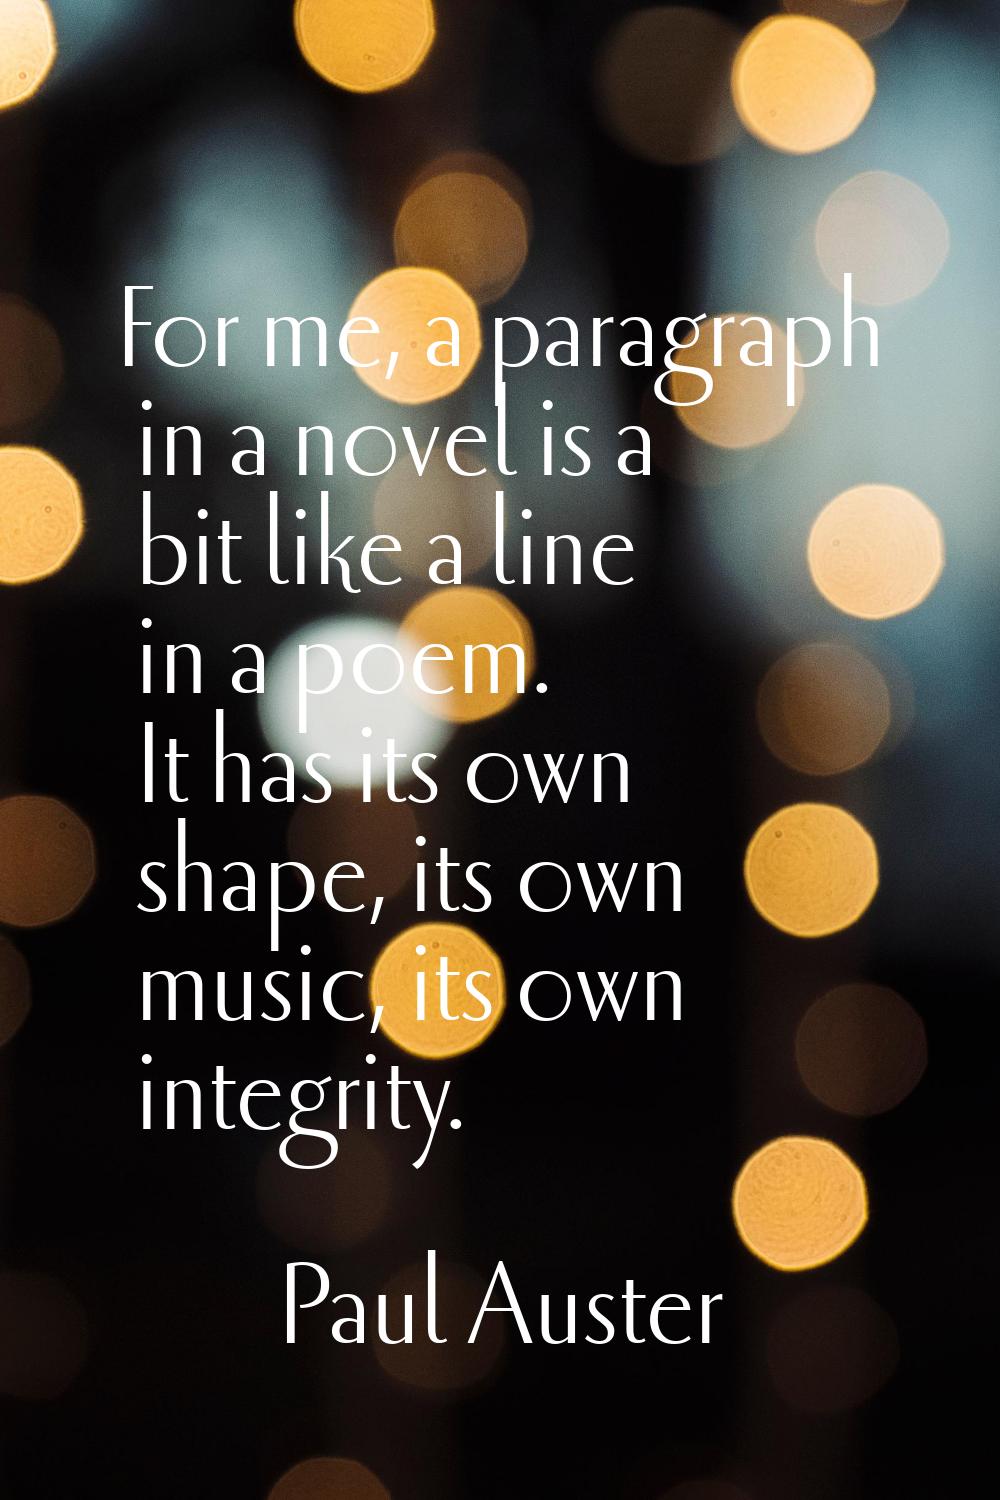 For me, a paragraph in a novel is a bit like a line in a poem. It has its own shape, its own music,